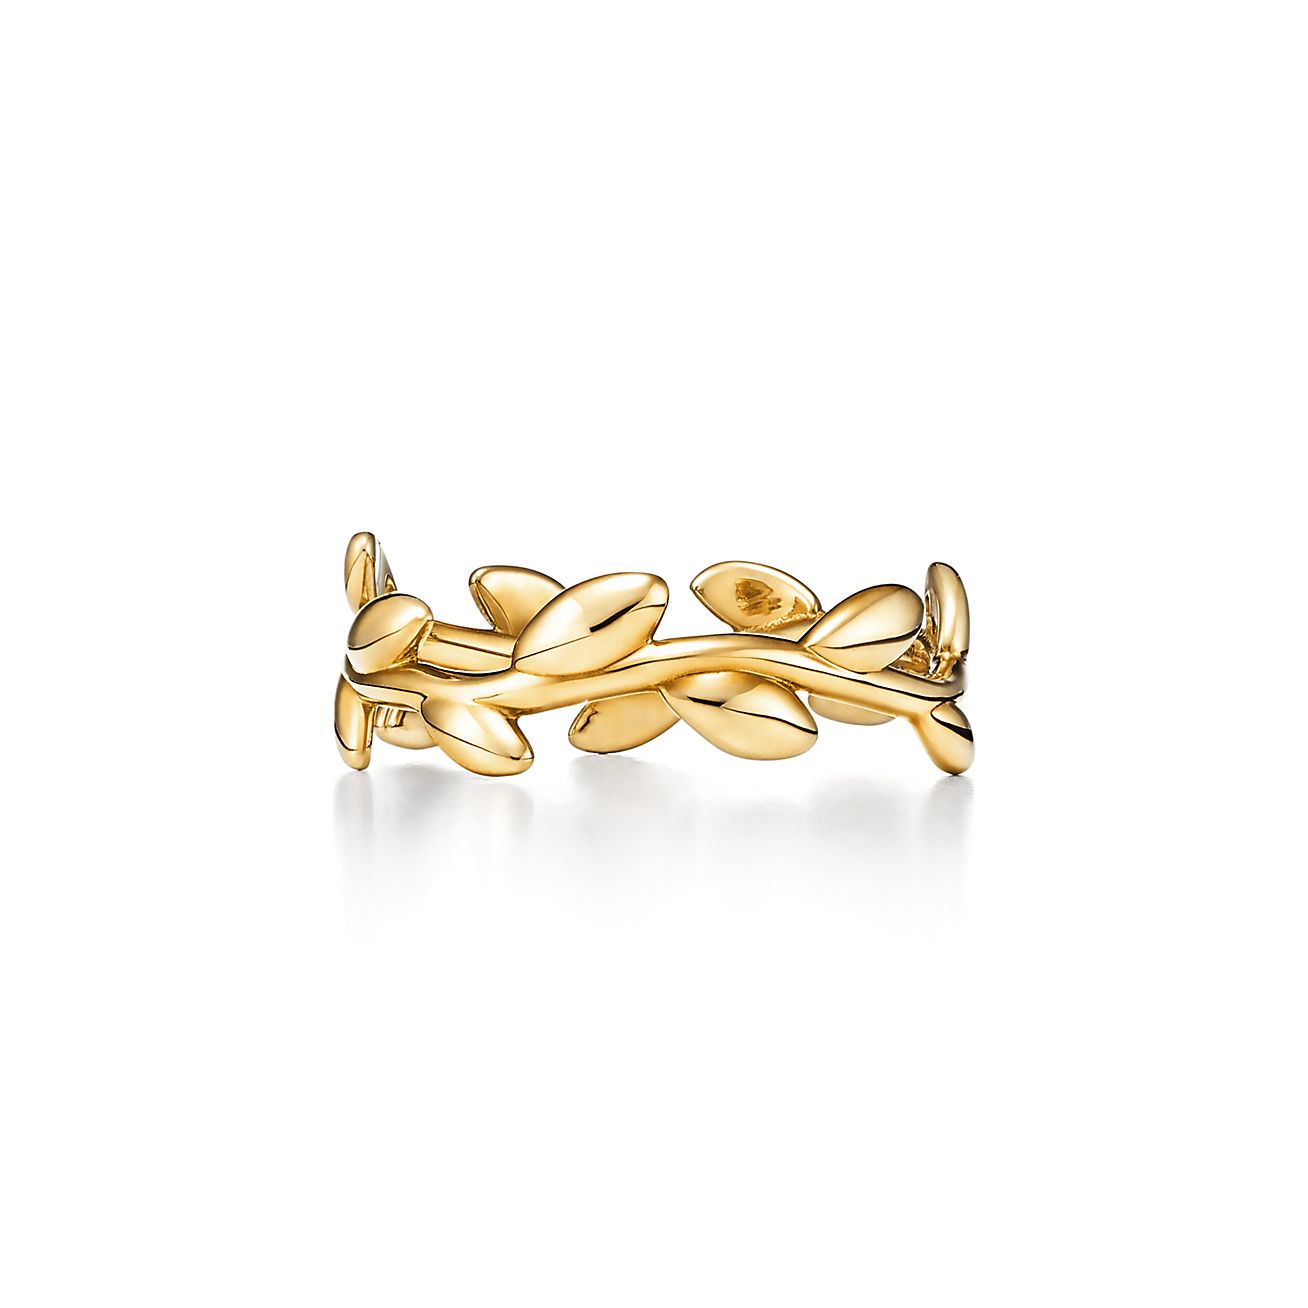 Solid 14k Yellow Gold Leaf Ring Curved Band Polished Finish Diamond Cut  Genuine Fancy 28MM, Size 5.5 - Walmart.com